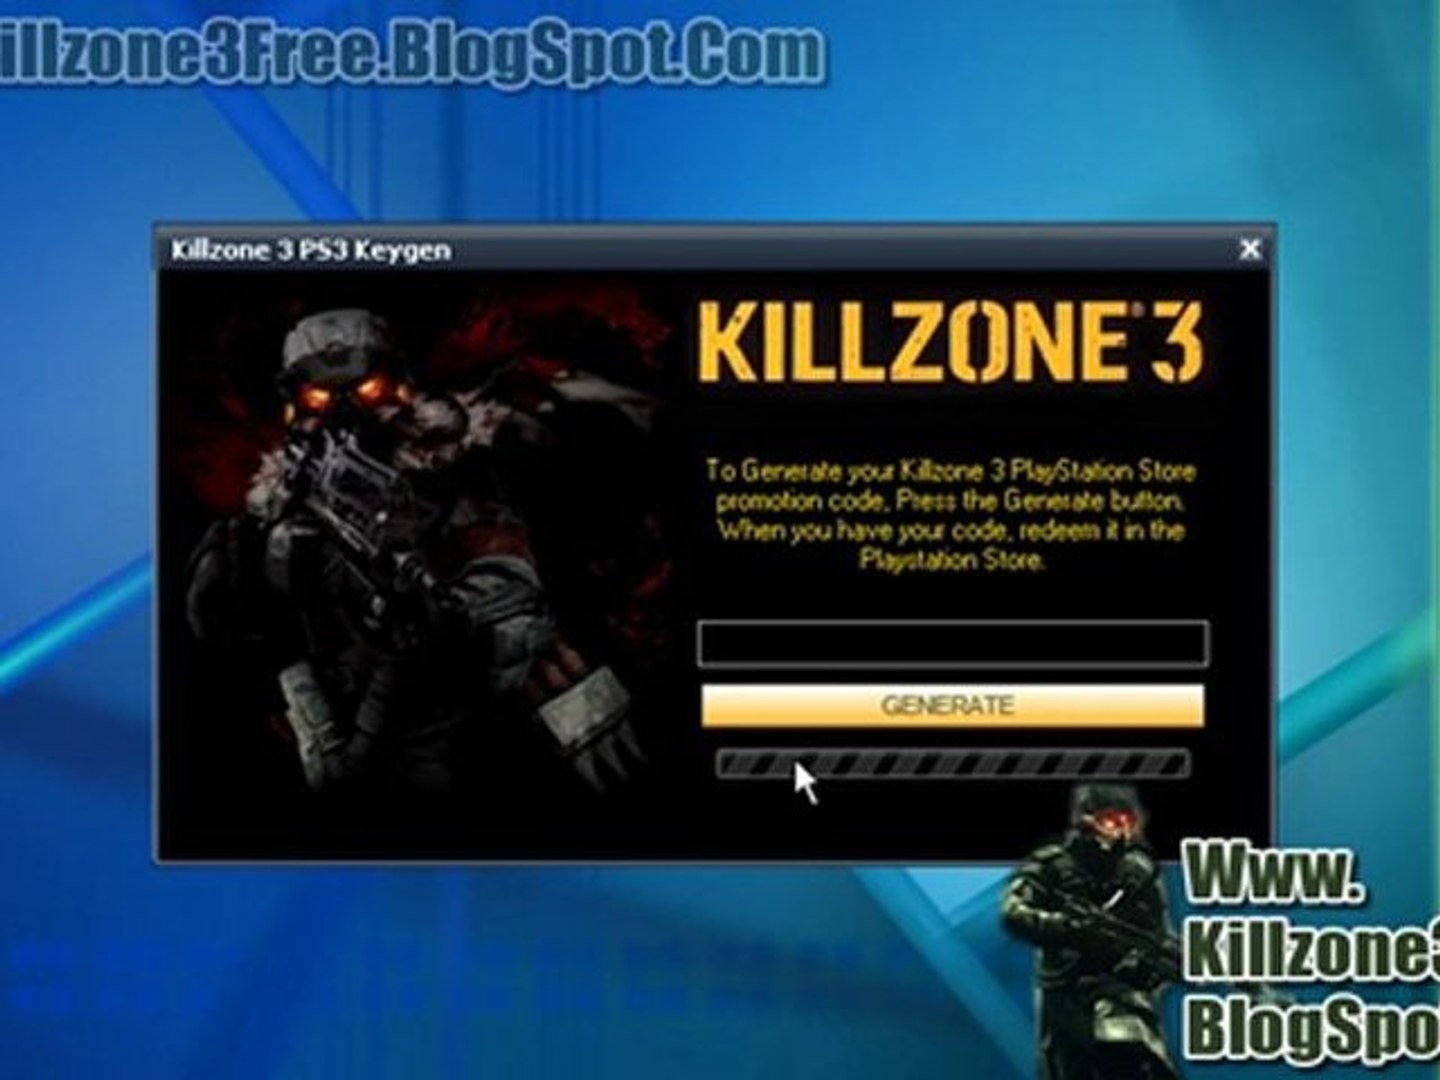 How to Download killzone 3 Crack Free on PS3 - Tutorial - video Dailymotion